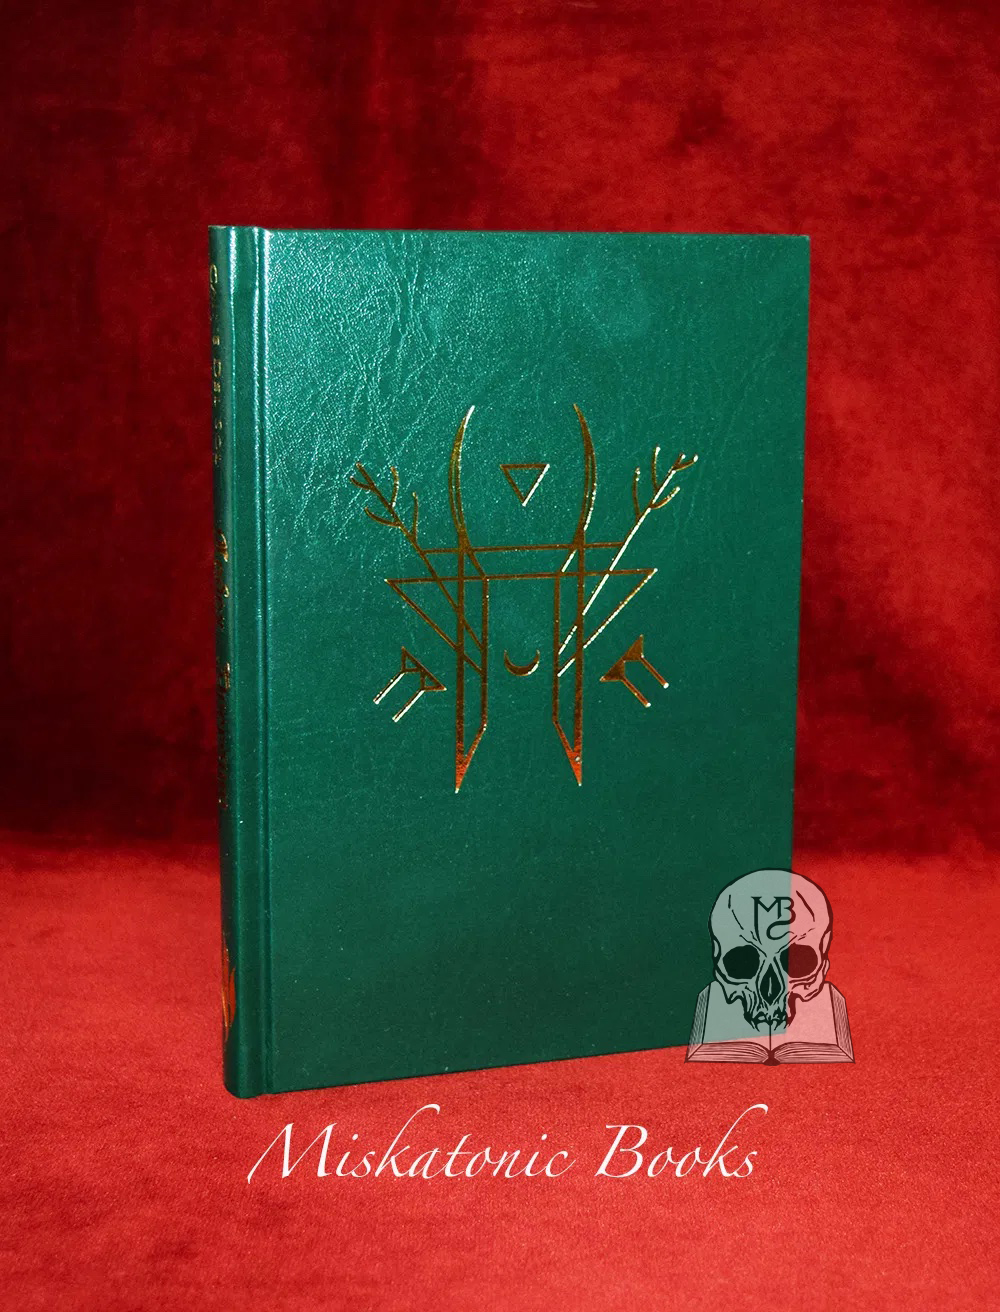 CODEX AVERSUM by Caine Del Sol - Deluxe Leather Bound Limited Edition Hardcover